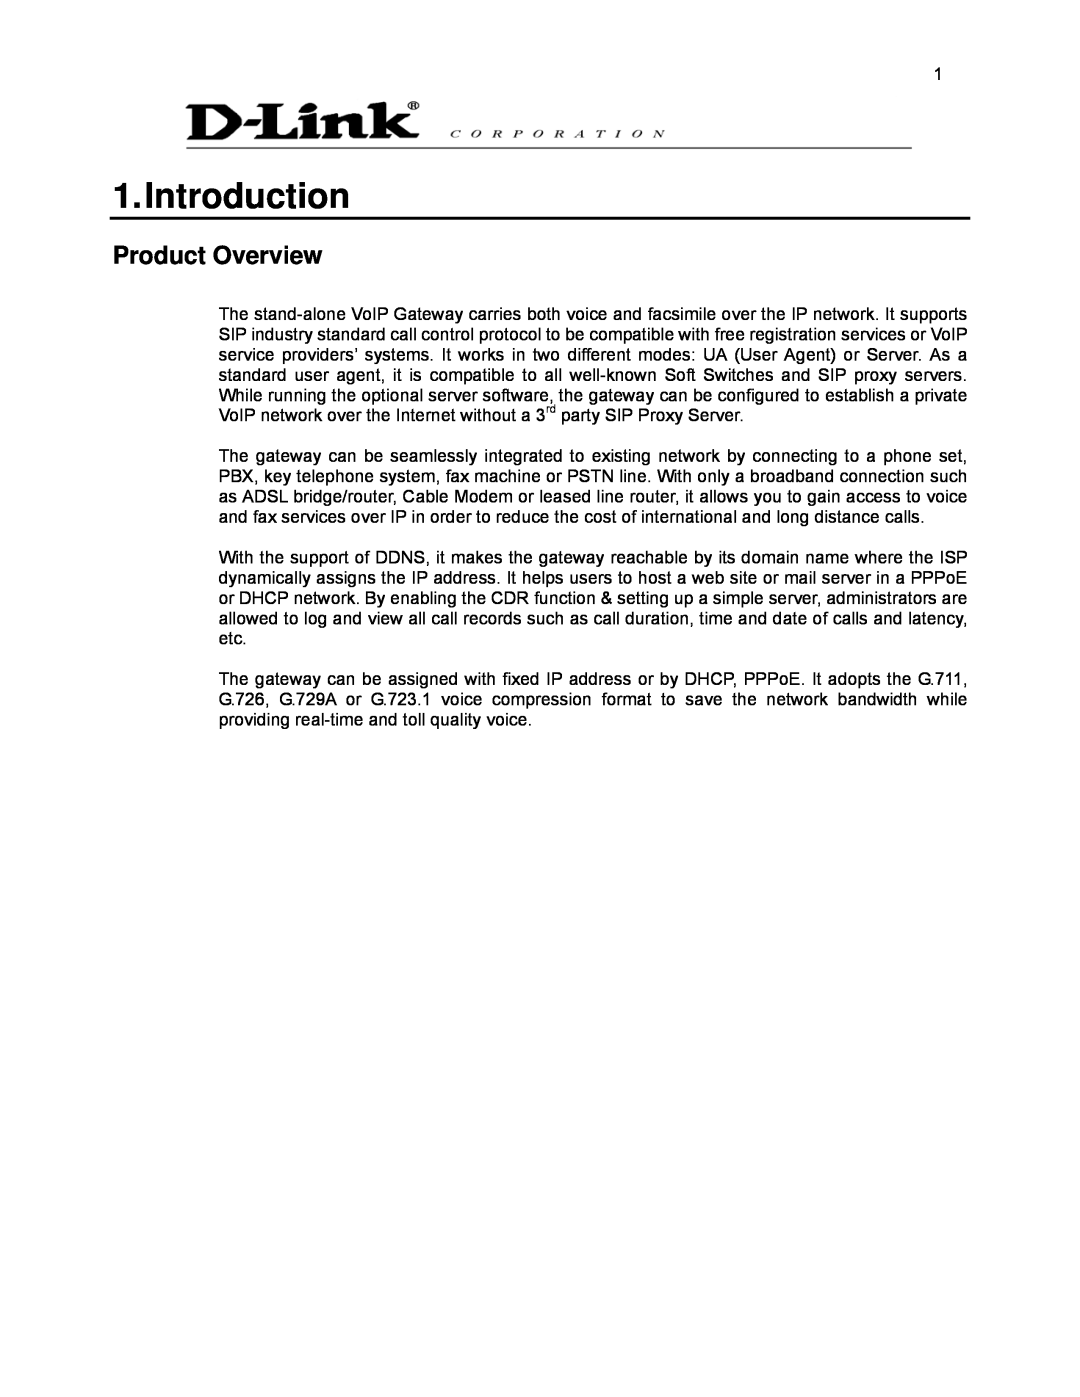 D-Link DVG-2032S user manual Introduction, Product Overview 